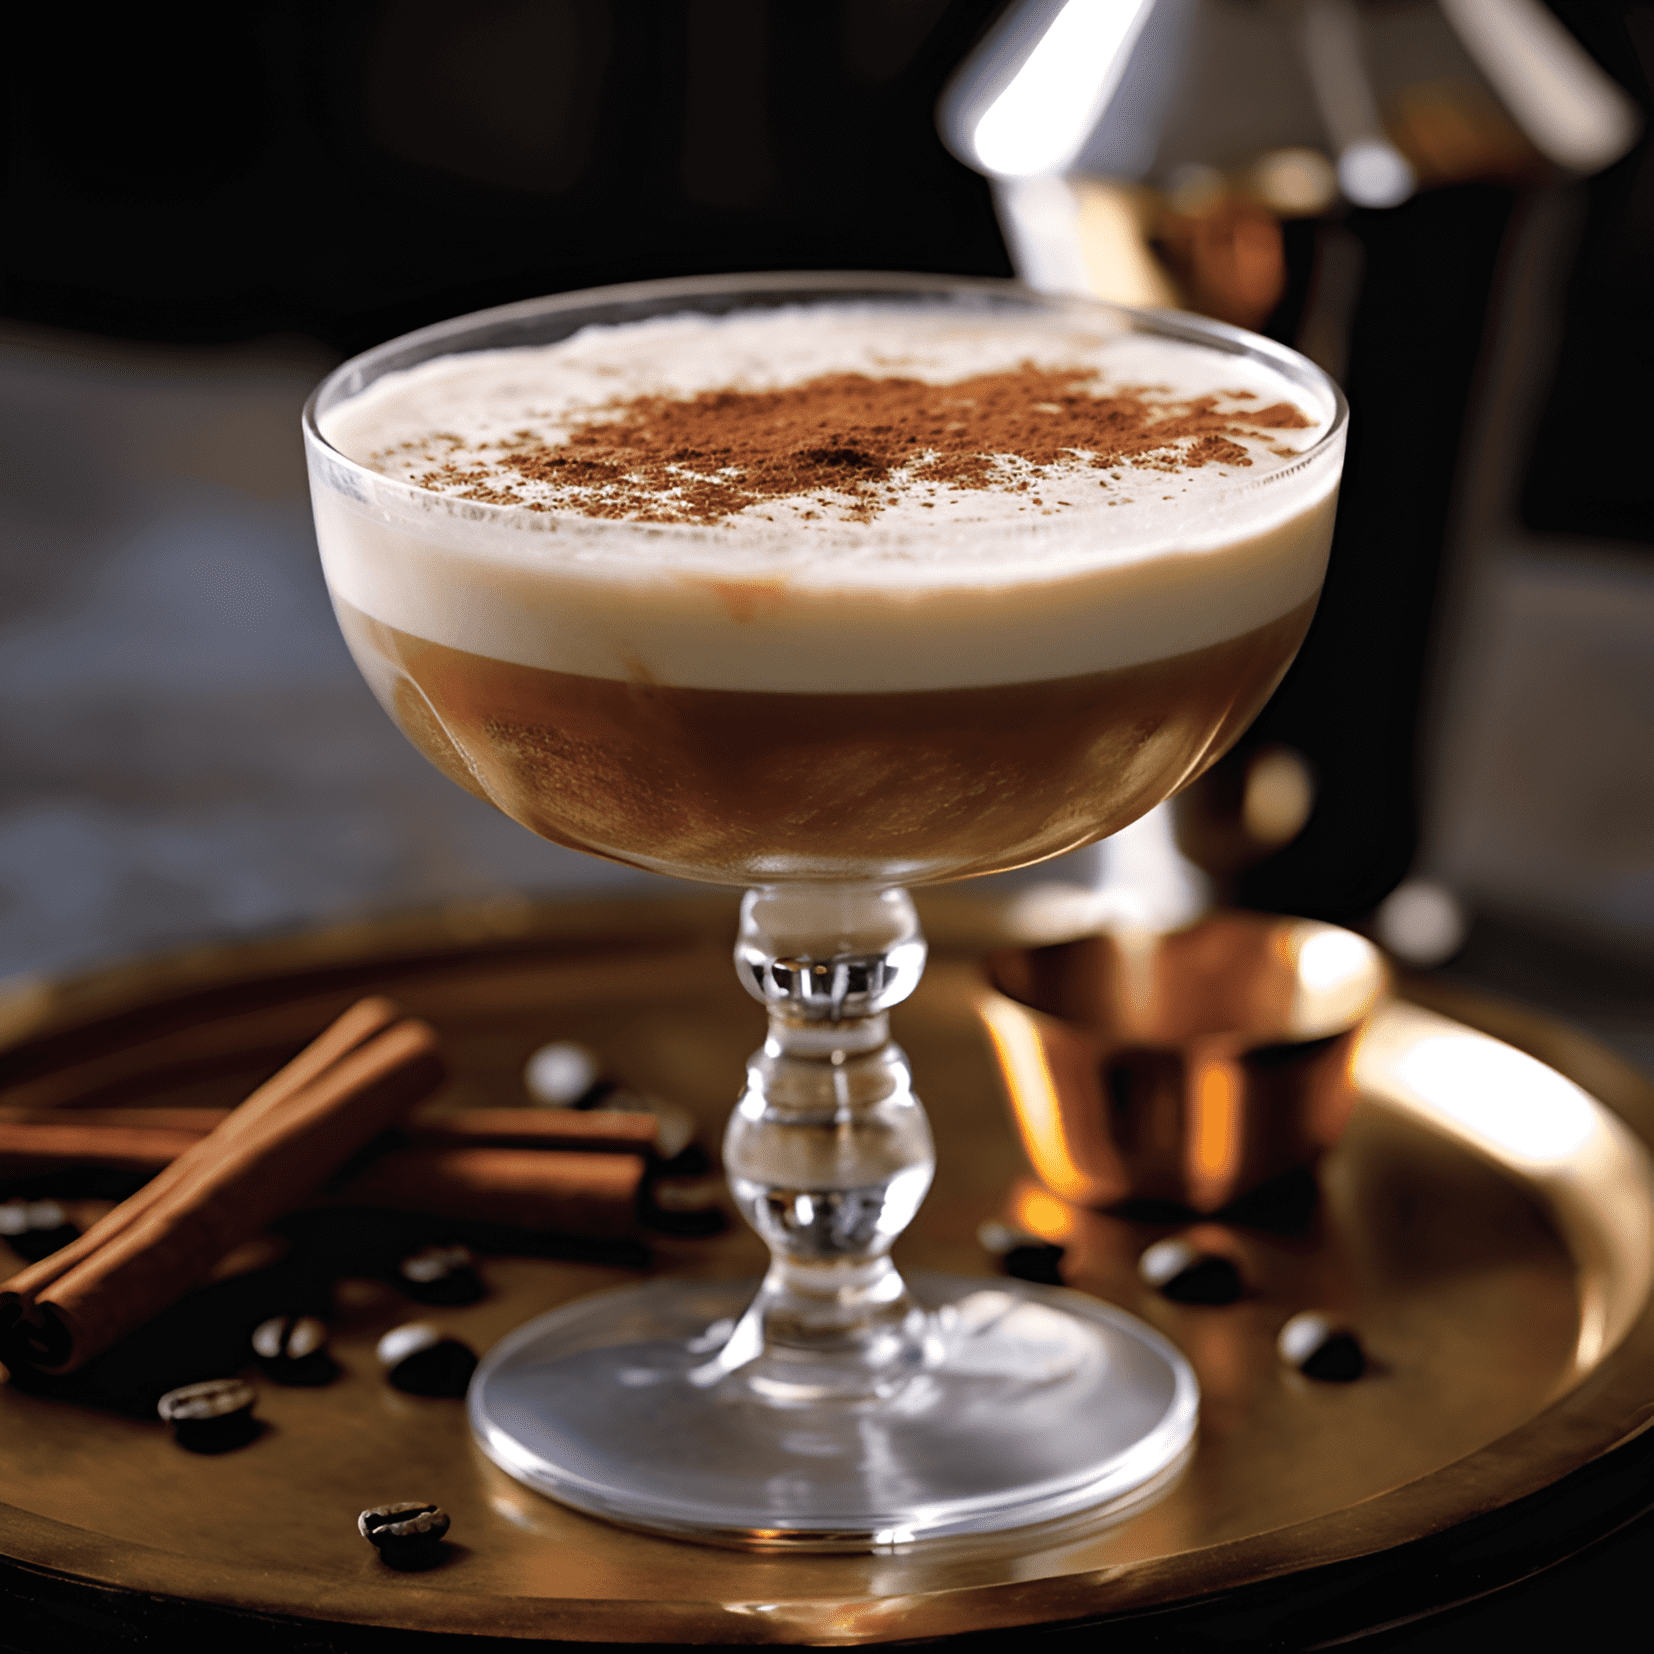 Mexican Coffee Cocktail Recipe - The Mexican Coffee cocktail offers a rich and bold coffee flavor, with a hint of sweetness from the coffee liqueur. The tequila adds a warm and slightly spicy kick, while the whipped cream provides a smooth and creamy finish.